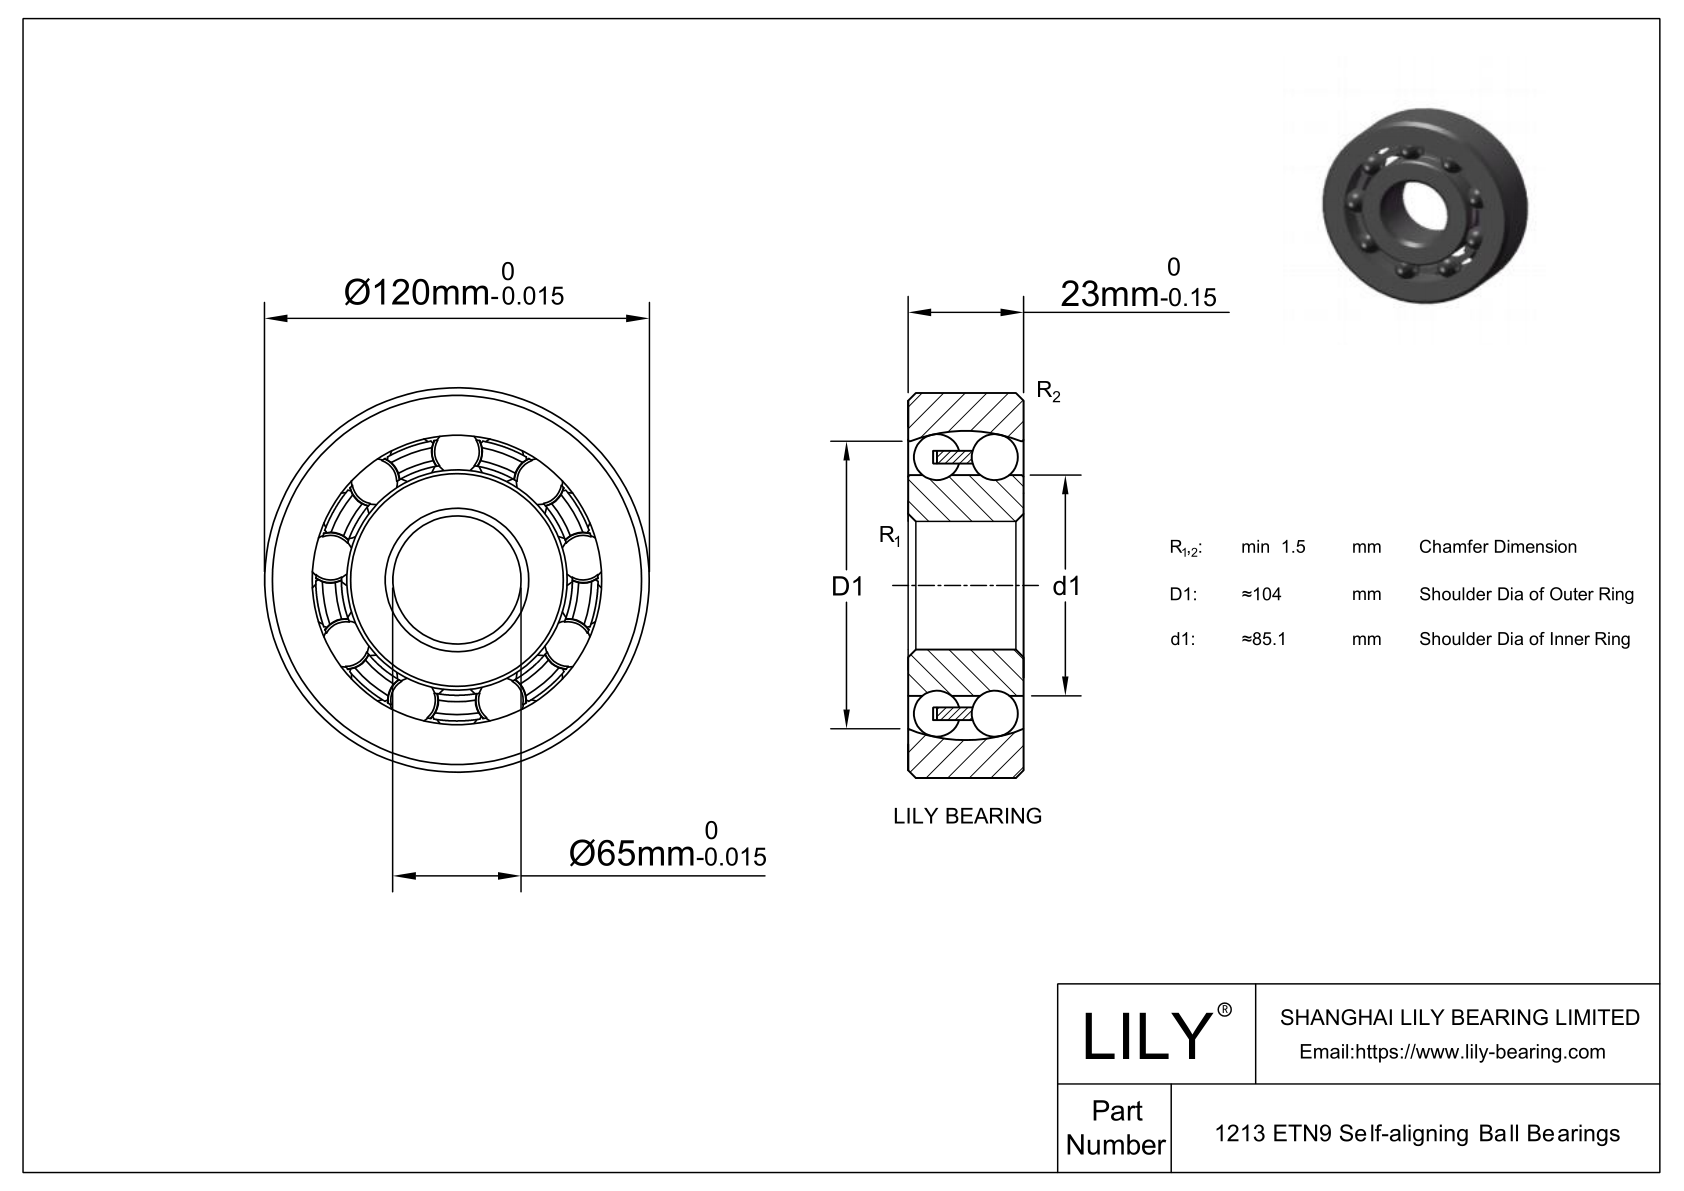 S1213 ETN9 Stainless Steel Self Aligning Ball Bearings cad drawing